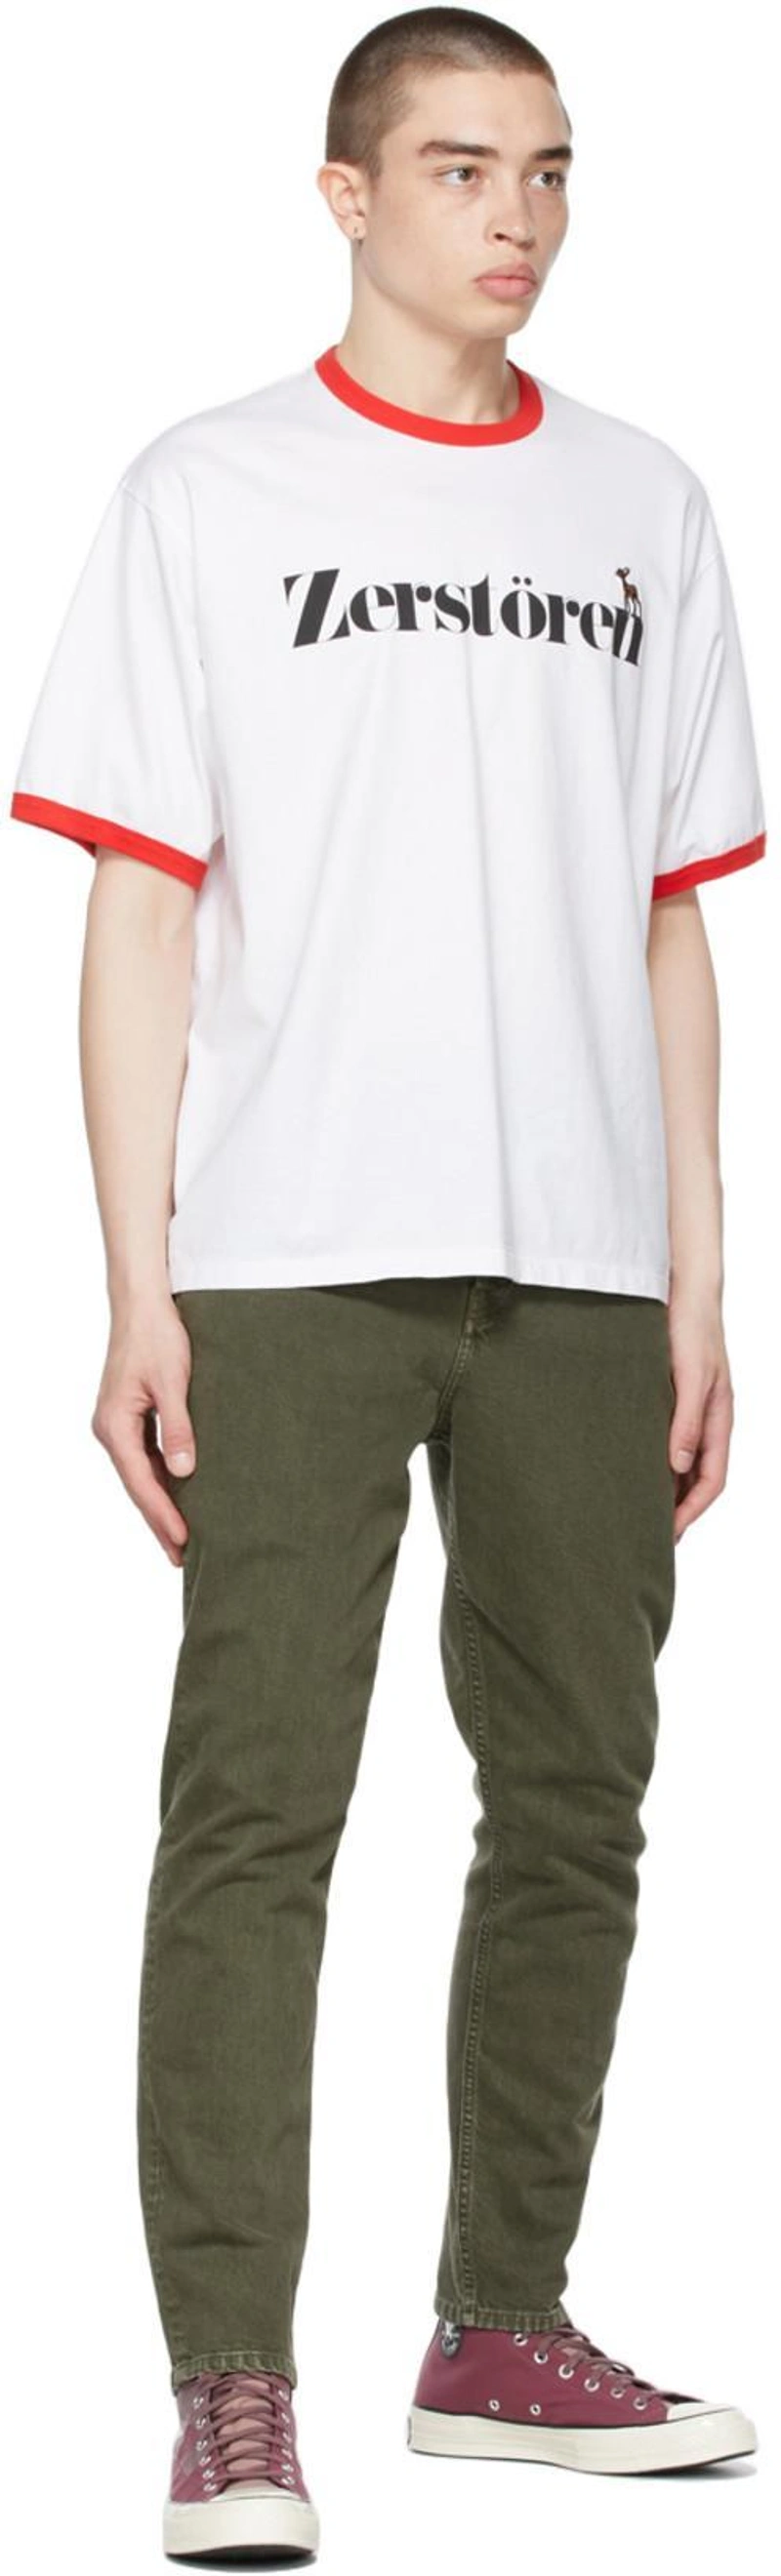 SSENSE's Post | Wearing: Undercover White 'zerstören' Print T-shirt; Helmut Lang Men's High-rise Jeans With Straps In Birch Green Stone; Converse Purple Plant Color Chuck 70 Sneakers In Rose Taupe/egret/bla